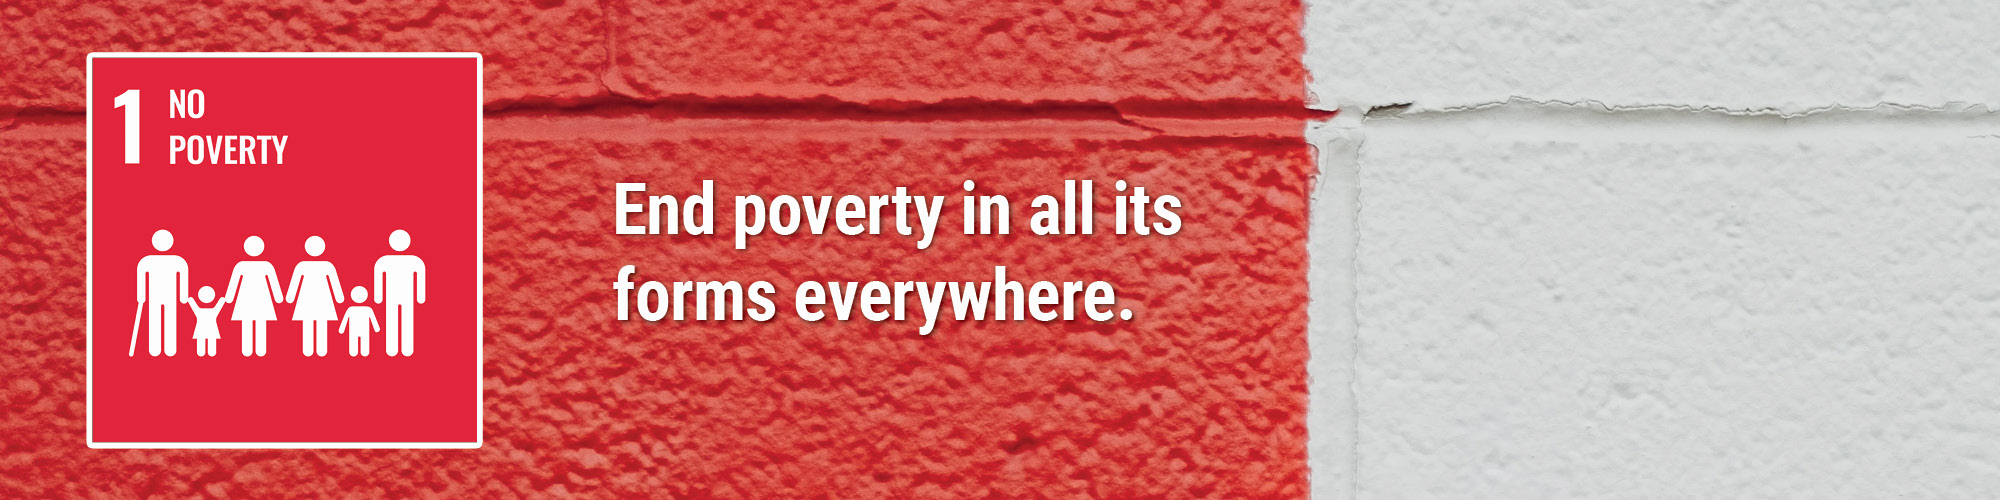 Goal 1: No Poverty | Sustainability Council